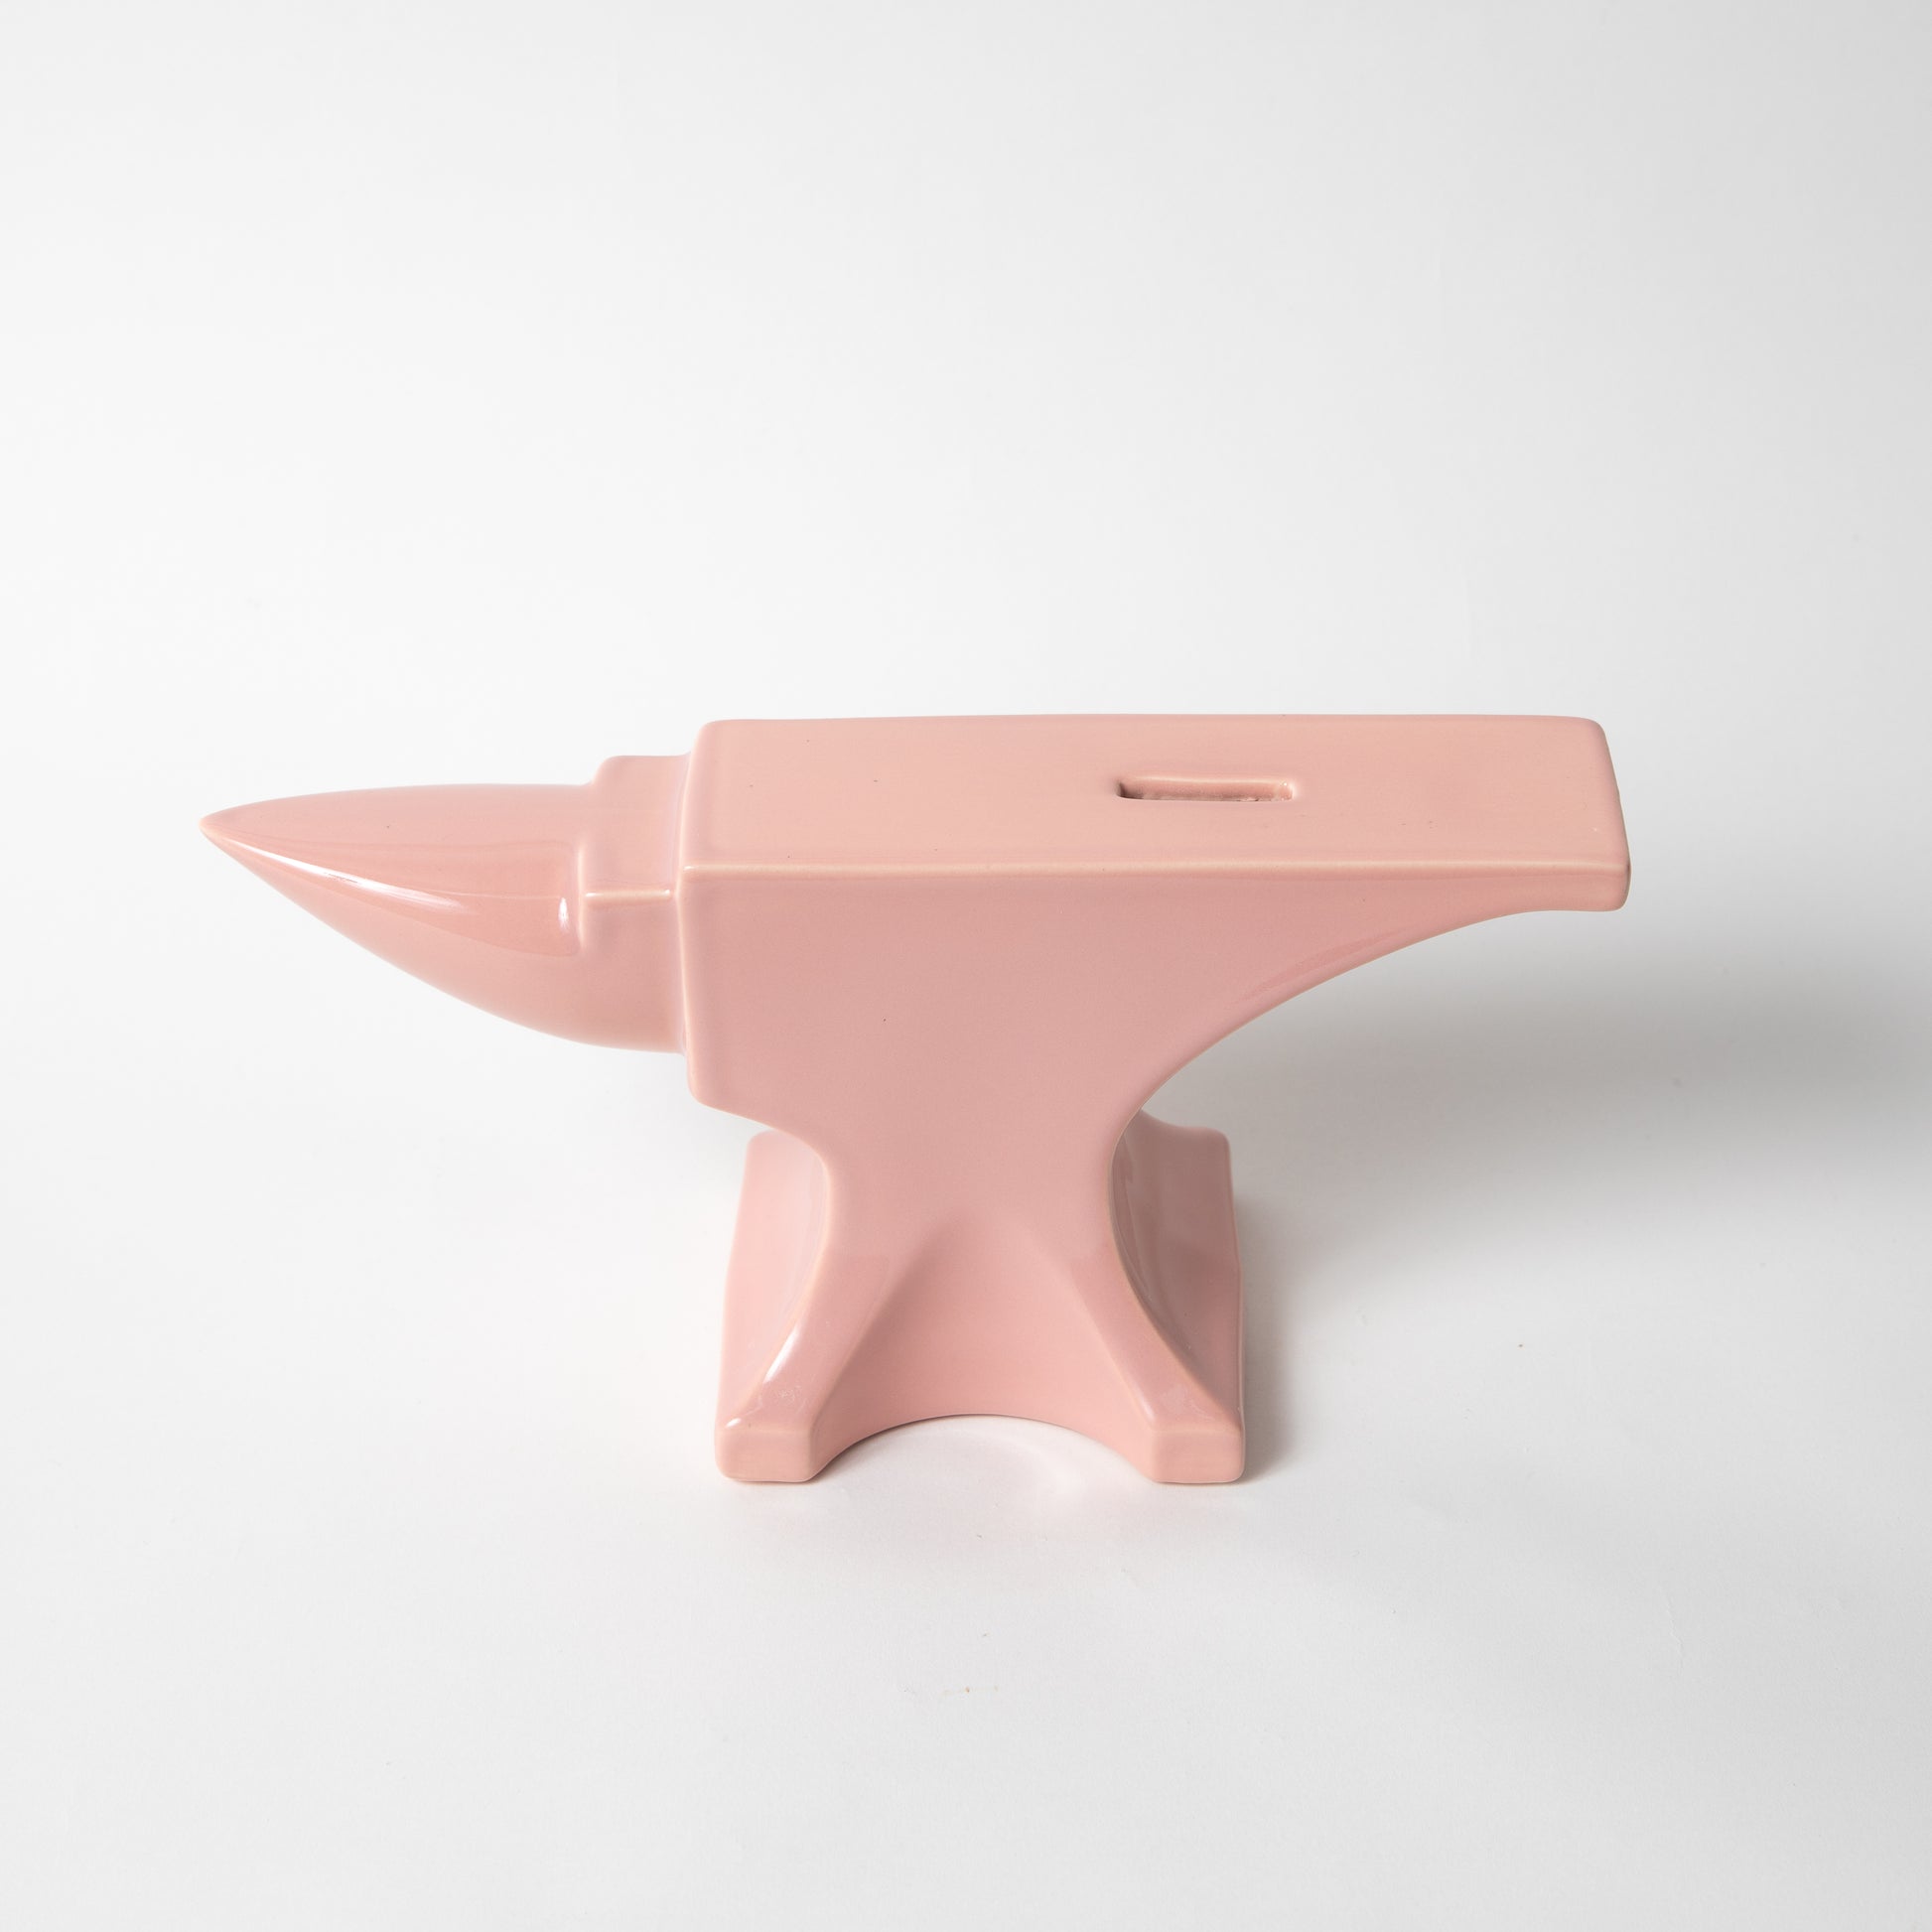 The ceramic Anvil Coin Bank in pink gloss.